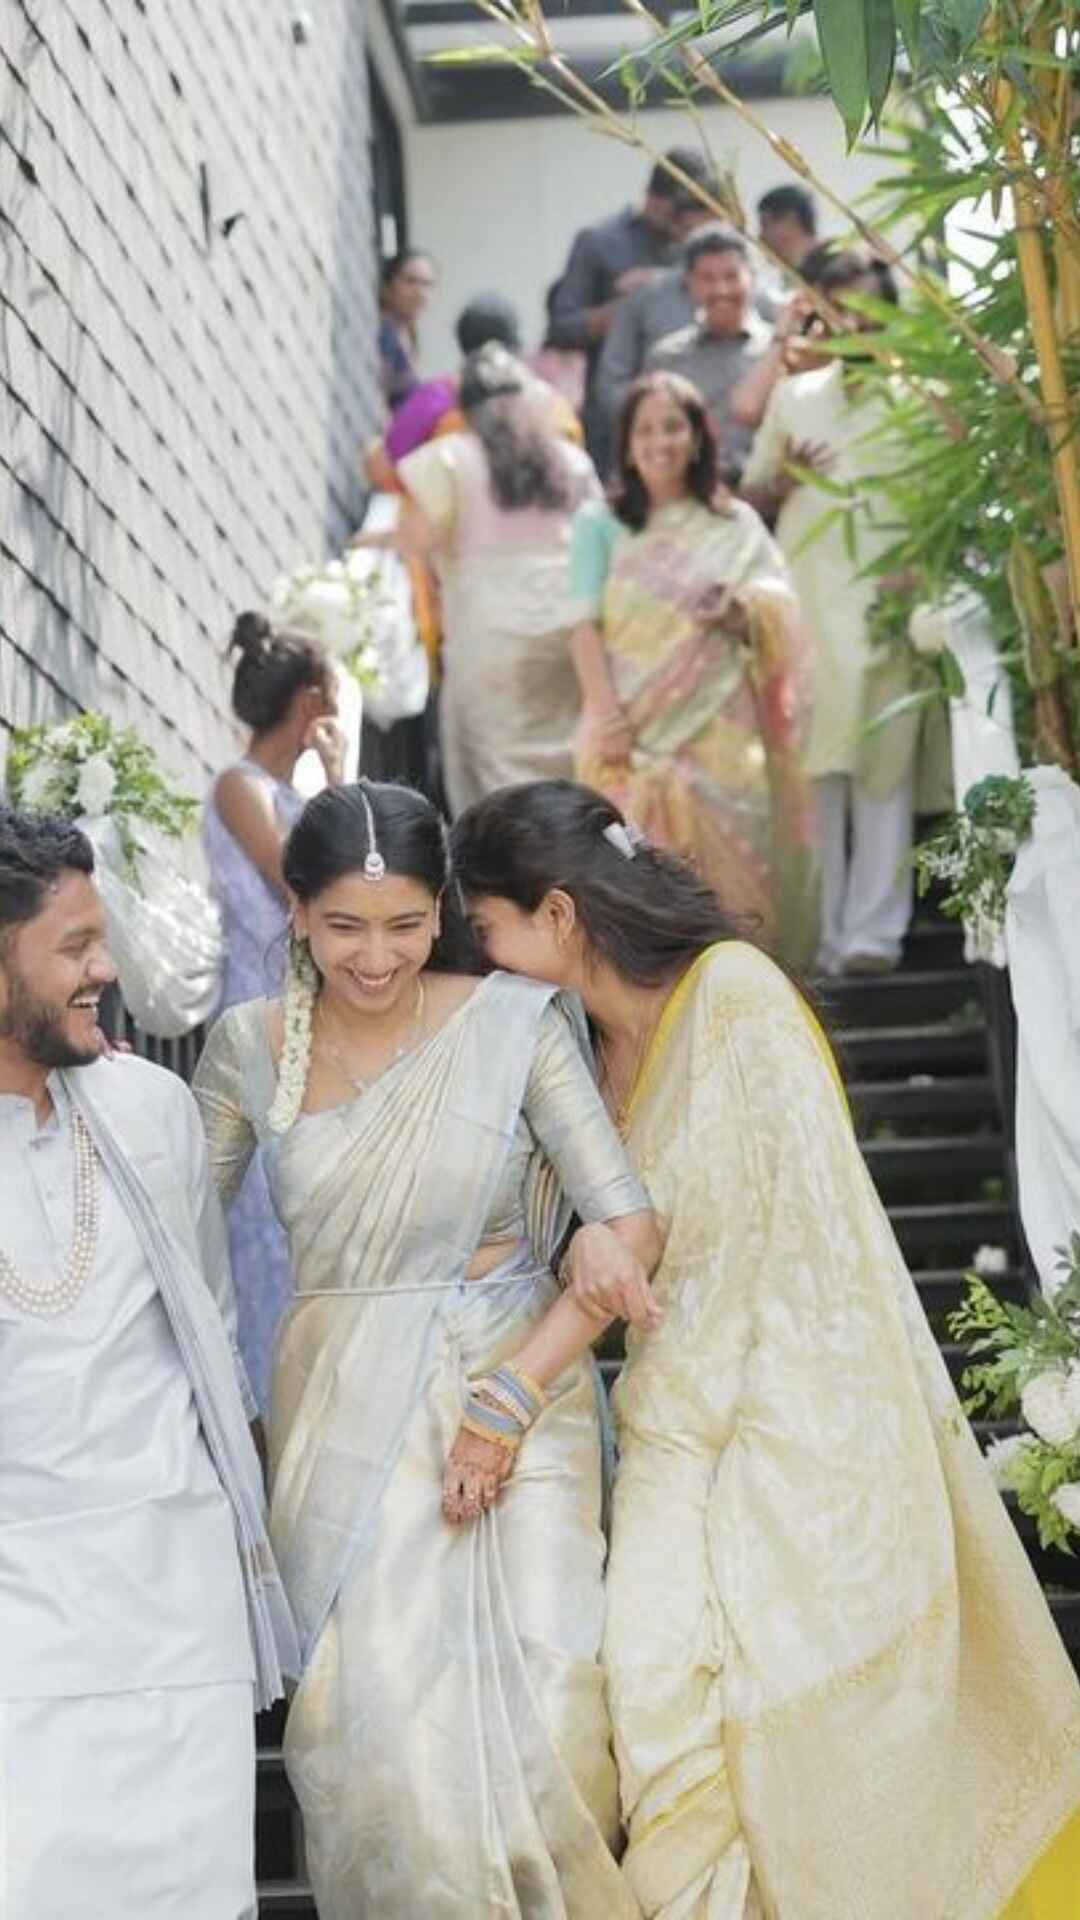 Sai Pallavi's Sister Gets Married; Check Out Pics Of Their Engagement Party